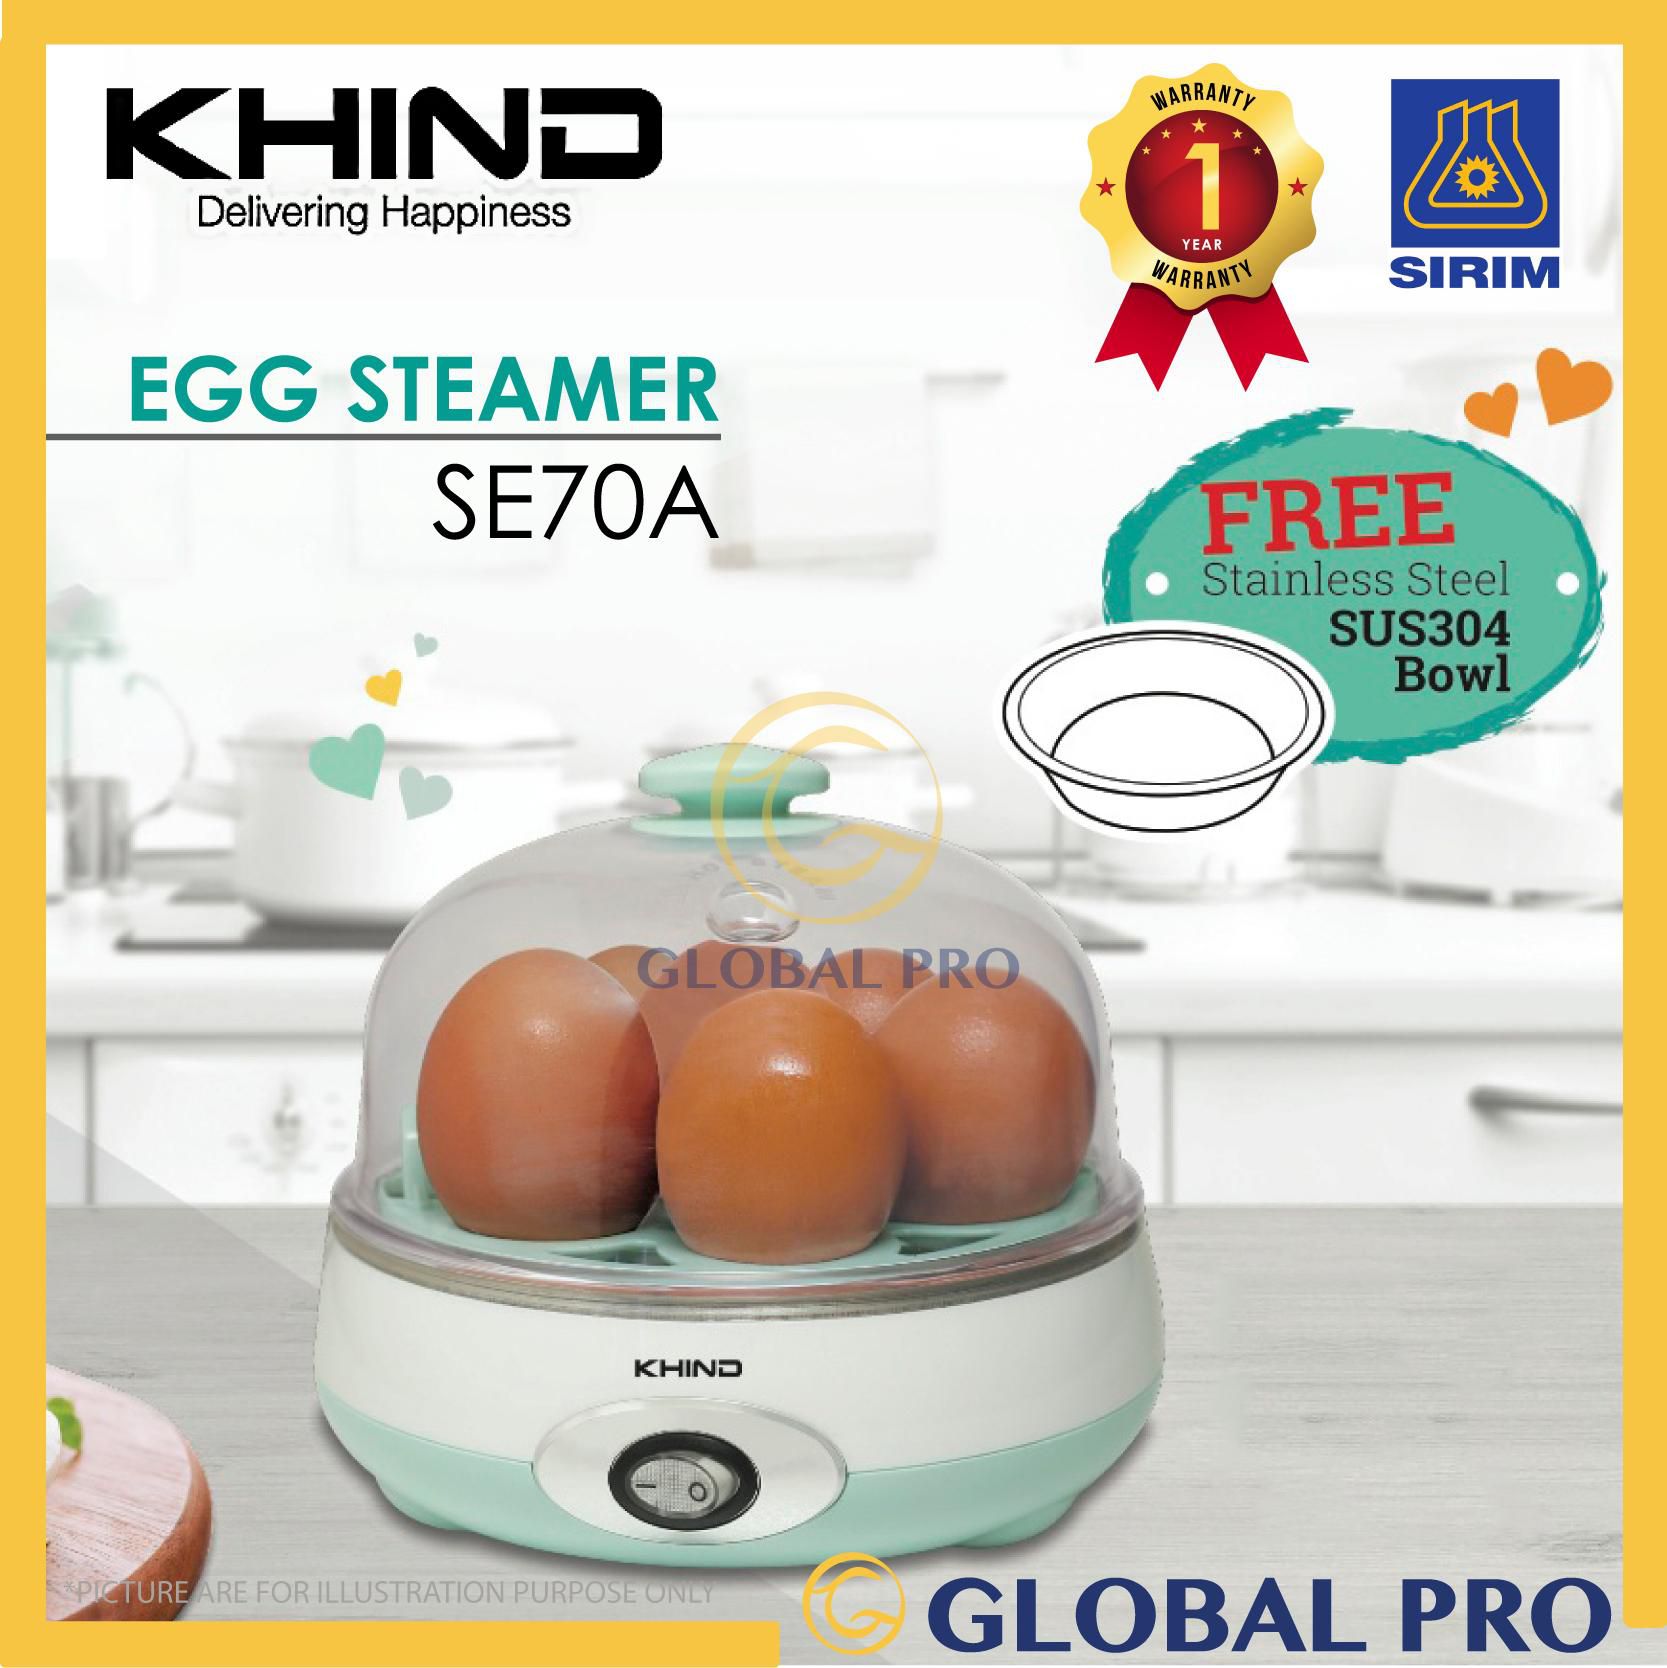 KHIND SE70A Electric Egg Steamer Free1PC SUS304 Stainless Steel Bowl